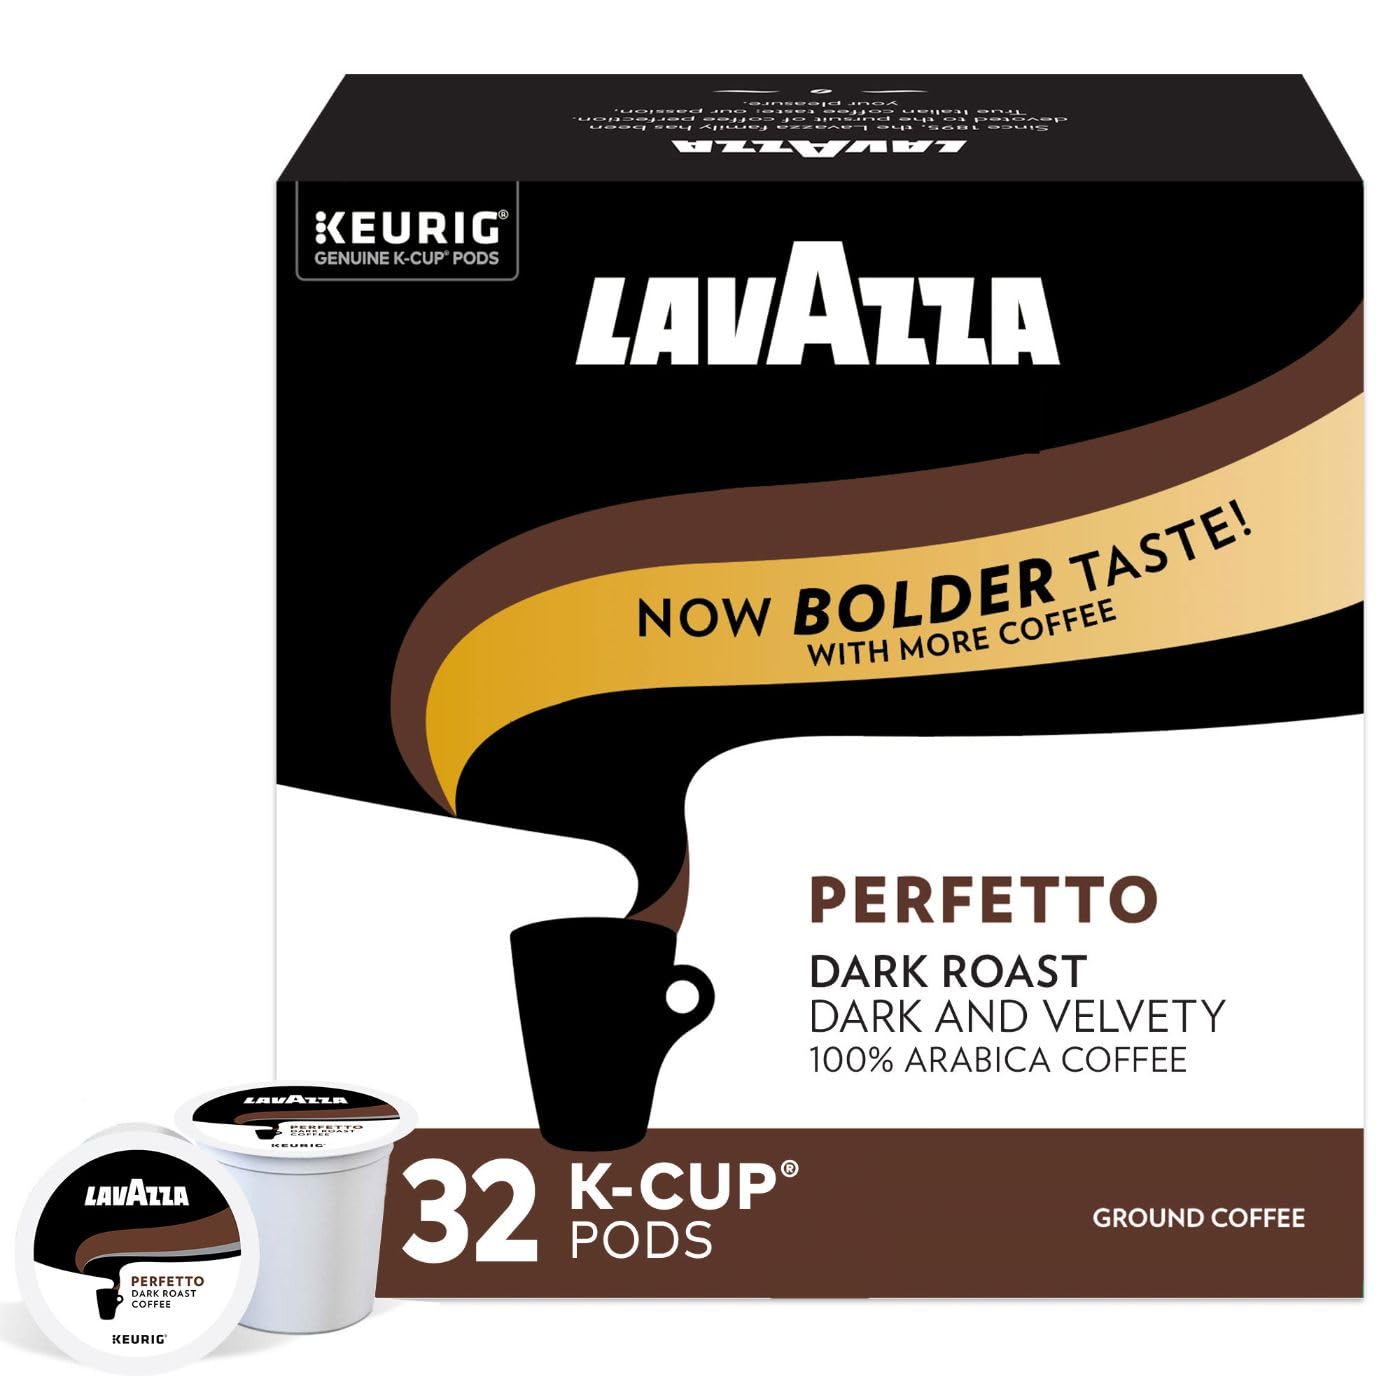 Lavazza Perfetto Single-Serve Coffee K-Cup® Pods for Keurig® Brewer, 32 Count (Pack of 4) Full-bodied dark roast with bold, dark flavor and notes of caramel, 100% Arabica